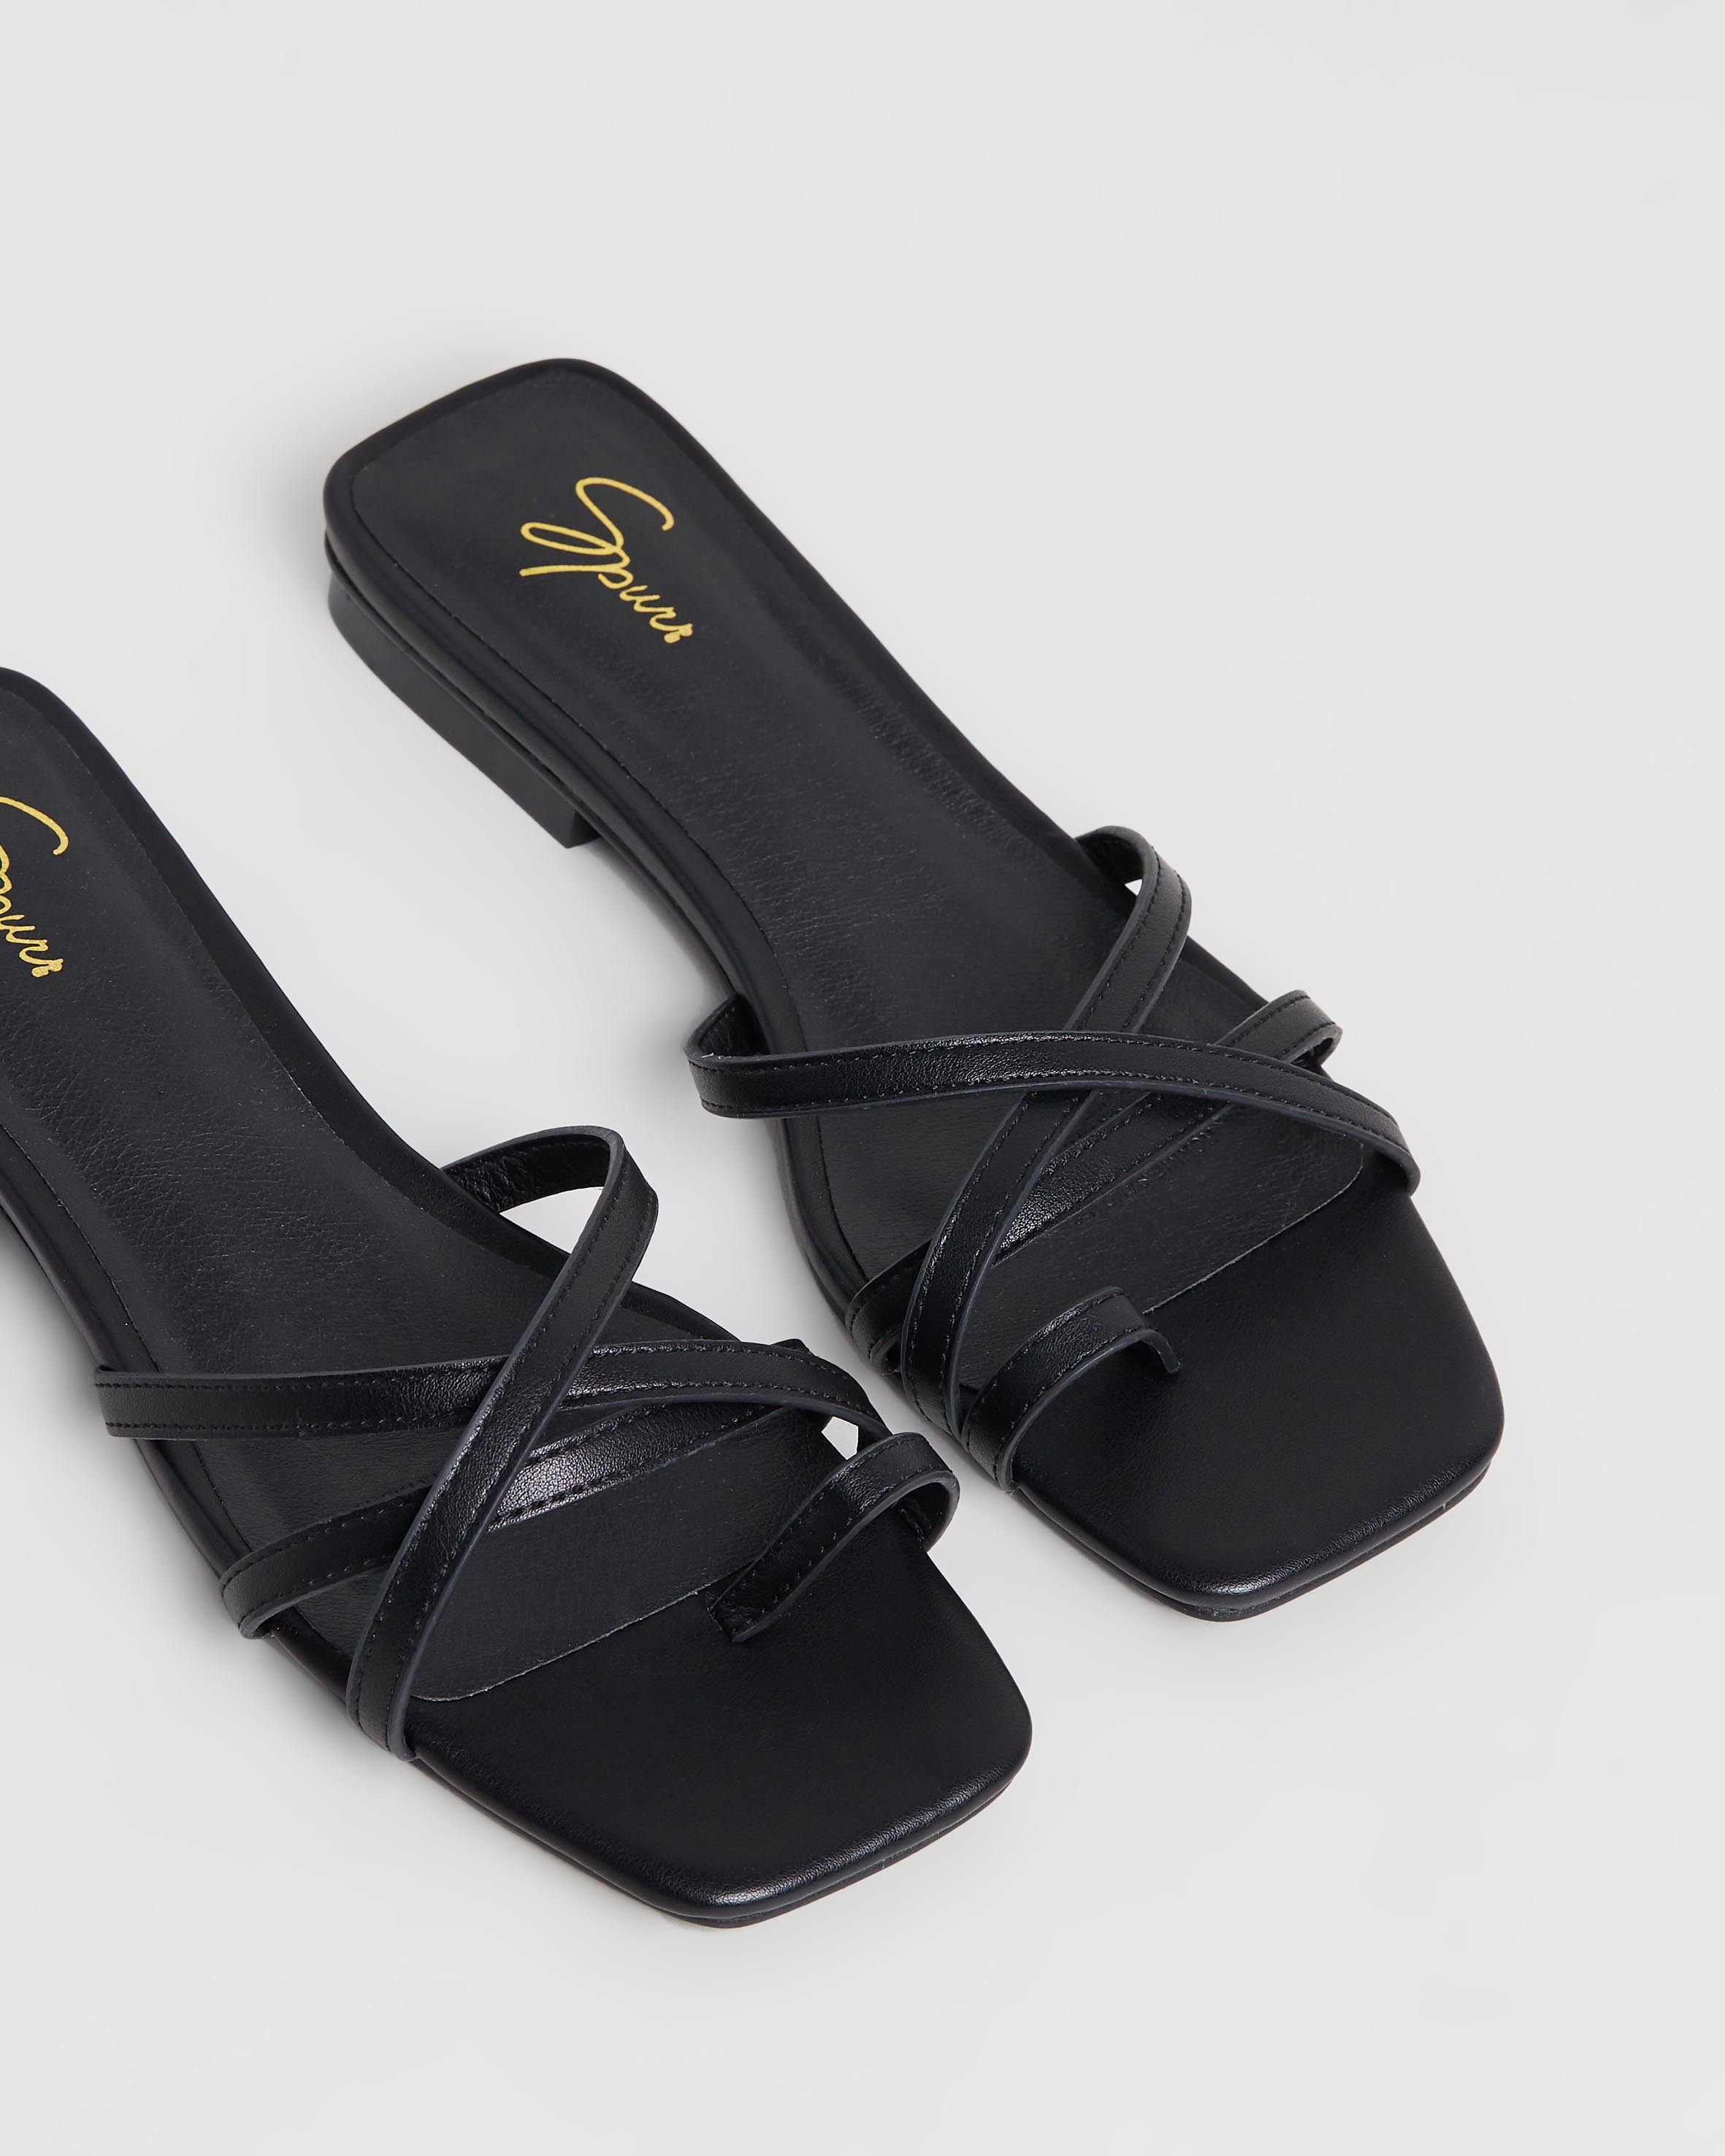 Ronnie Sandals Black Smooth by Spurr | ShoeSales